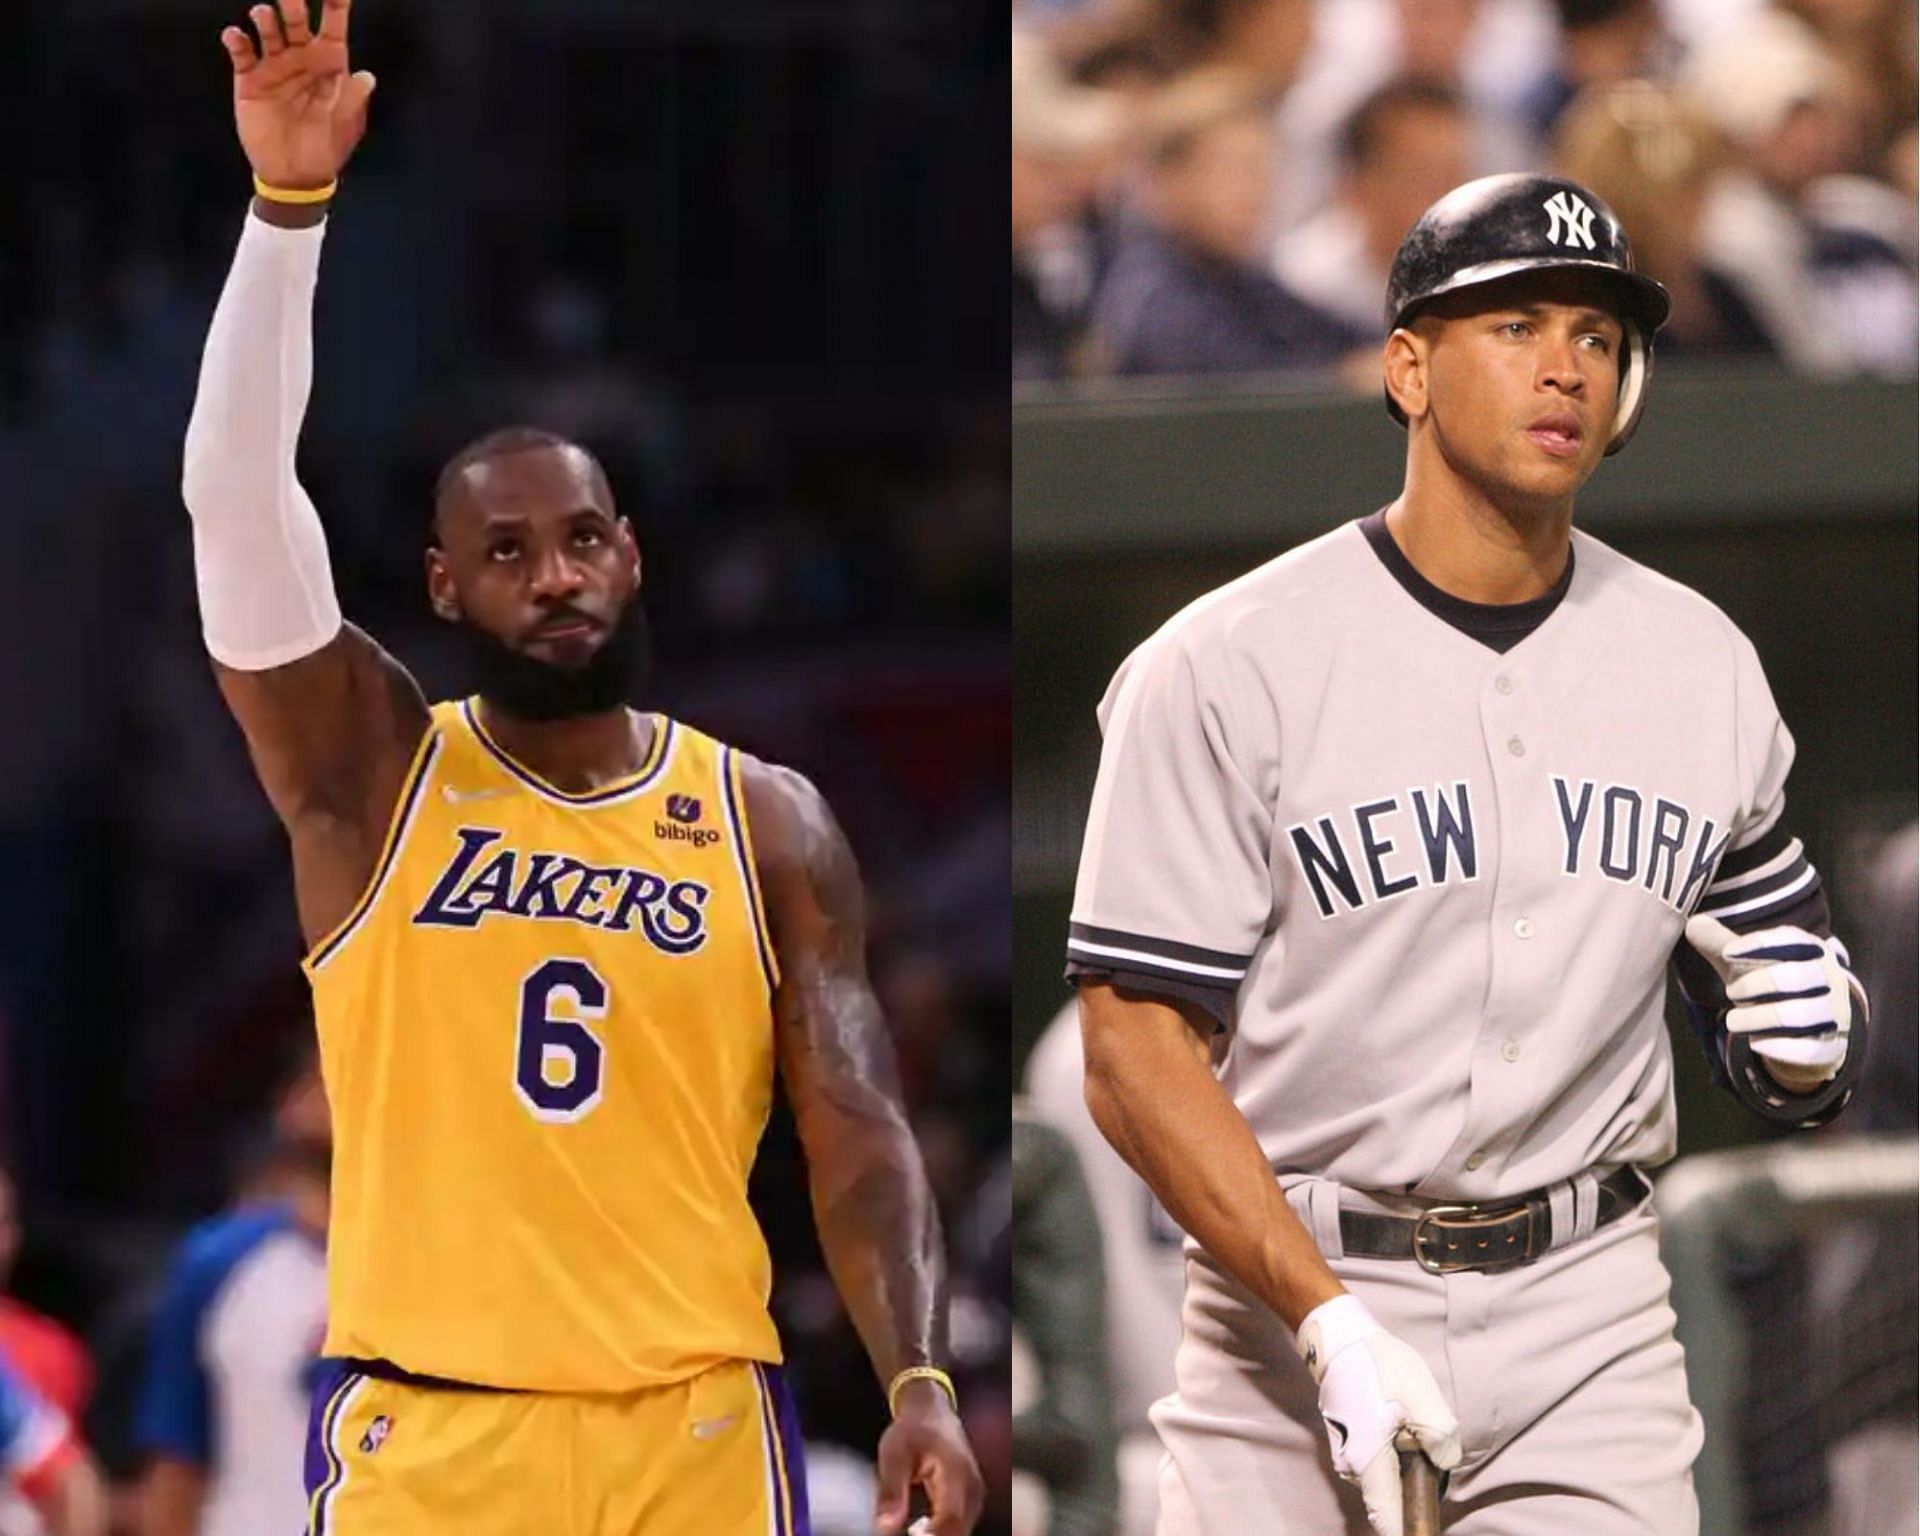 It's unfortunate that we have a story like Alex Rodriguez - Throwback to  when NBA Champ LeBron James was critical of Yankees legend Alex Rodriguez's  PED use scandal